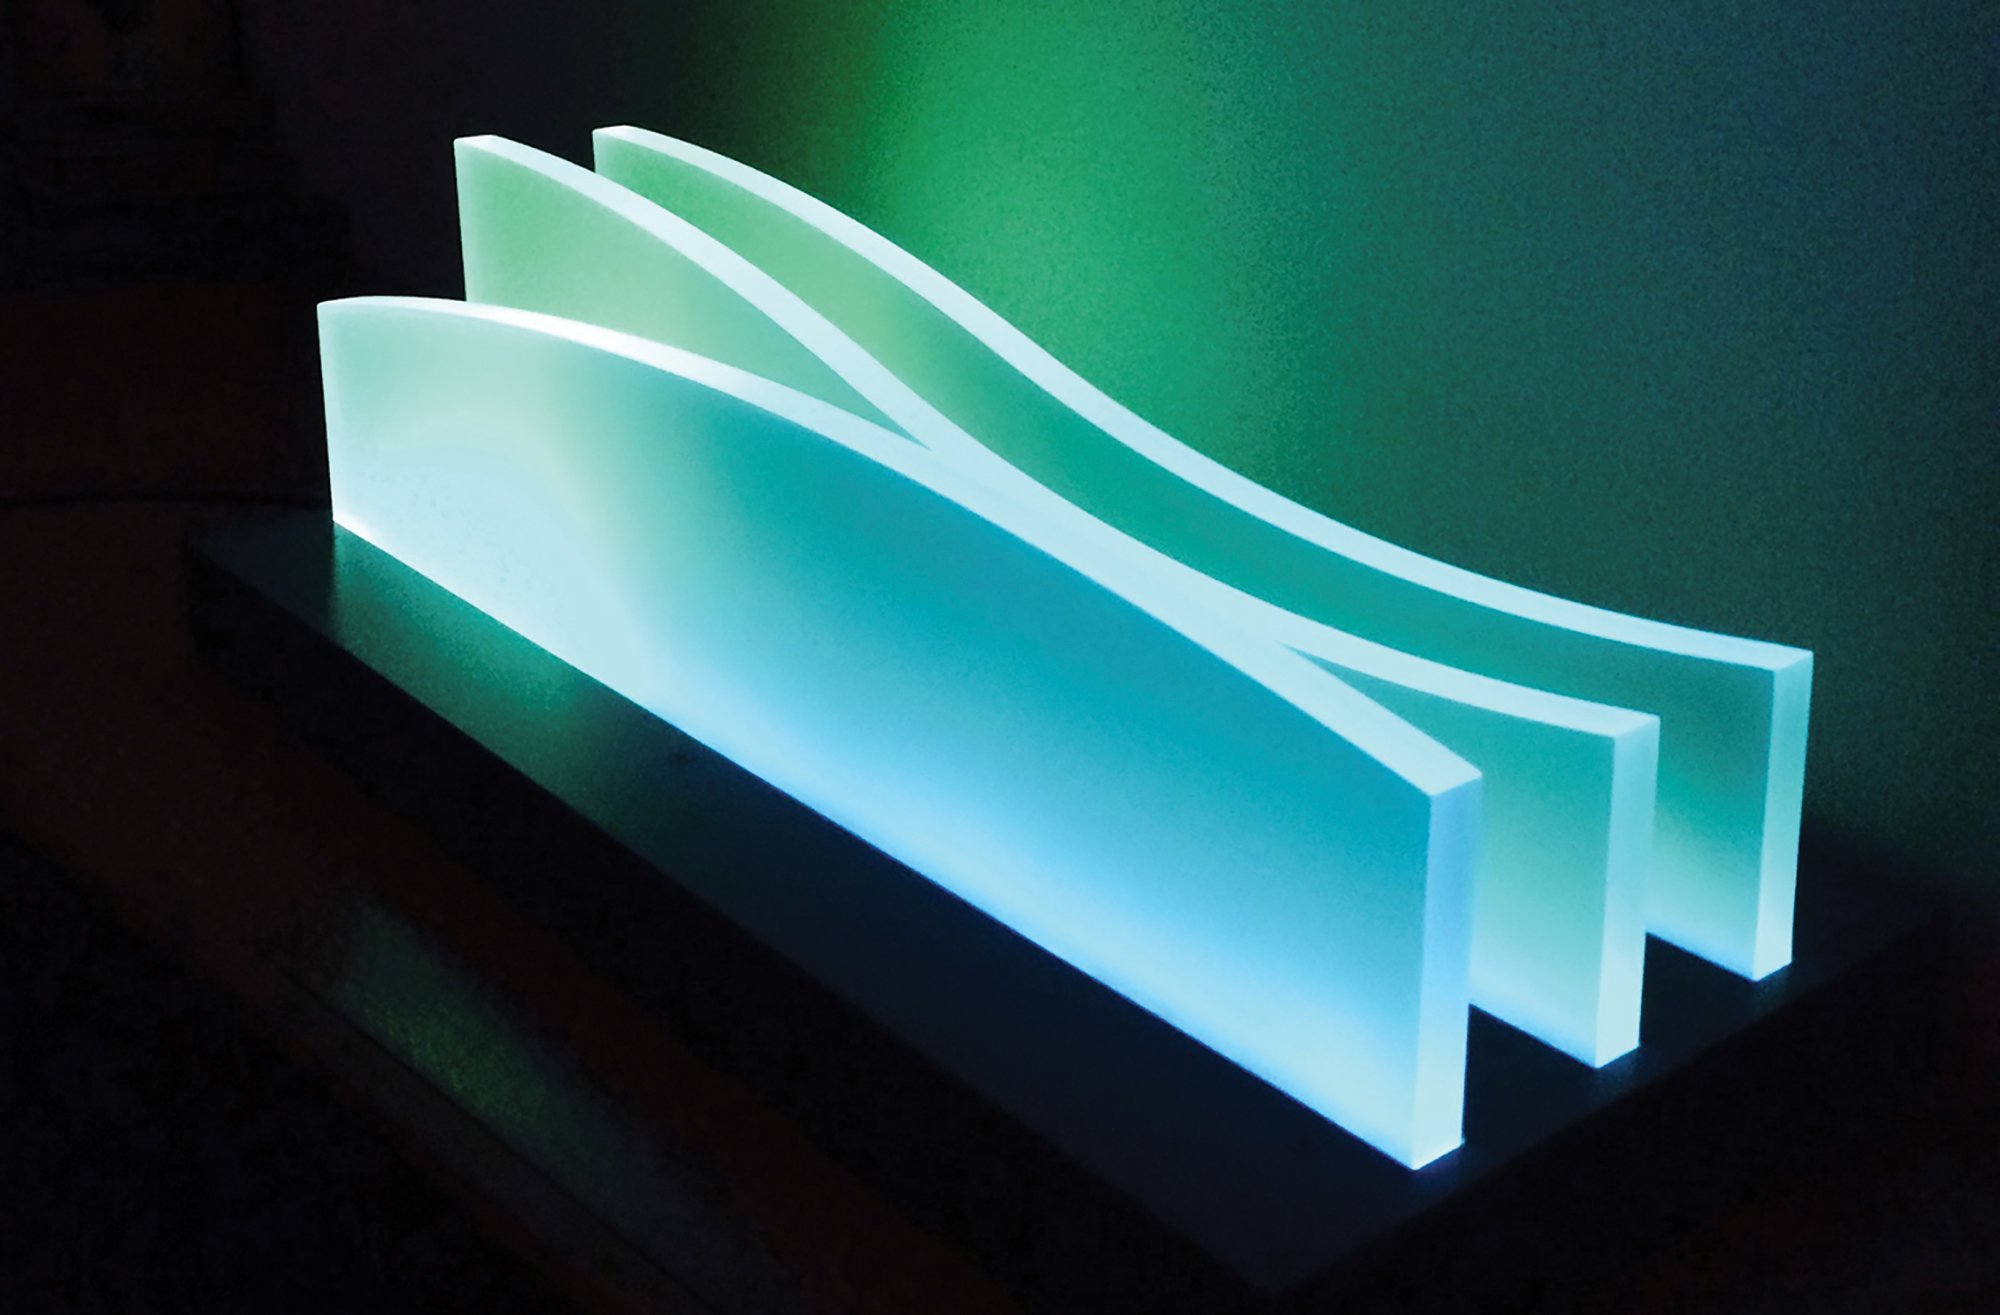 Hiding the hardware for the "Waves" light sculpture required a low-profile cabinet for the acrylic blades. 